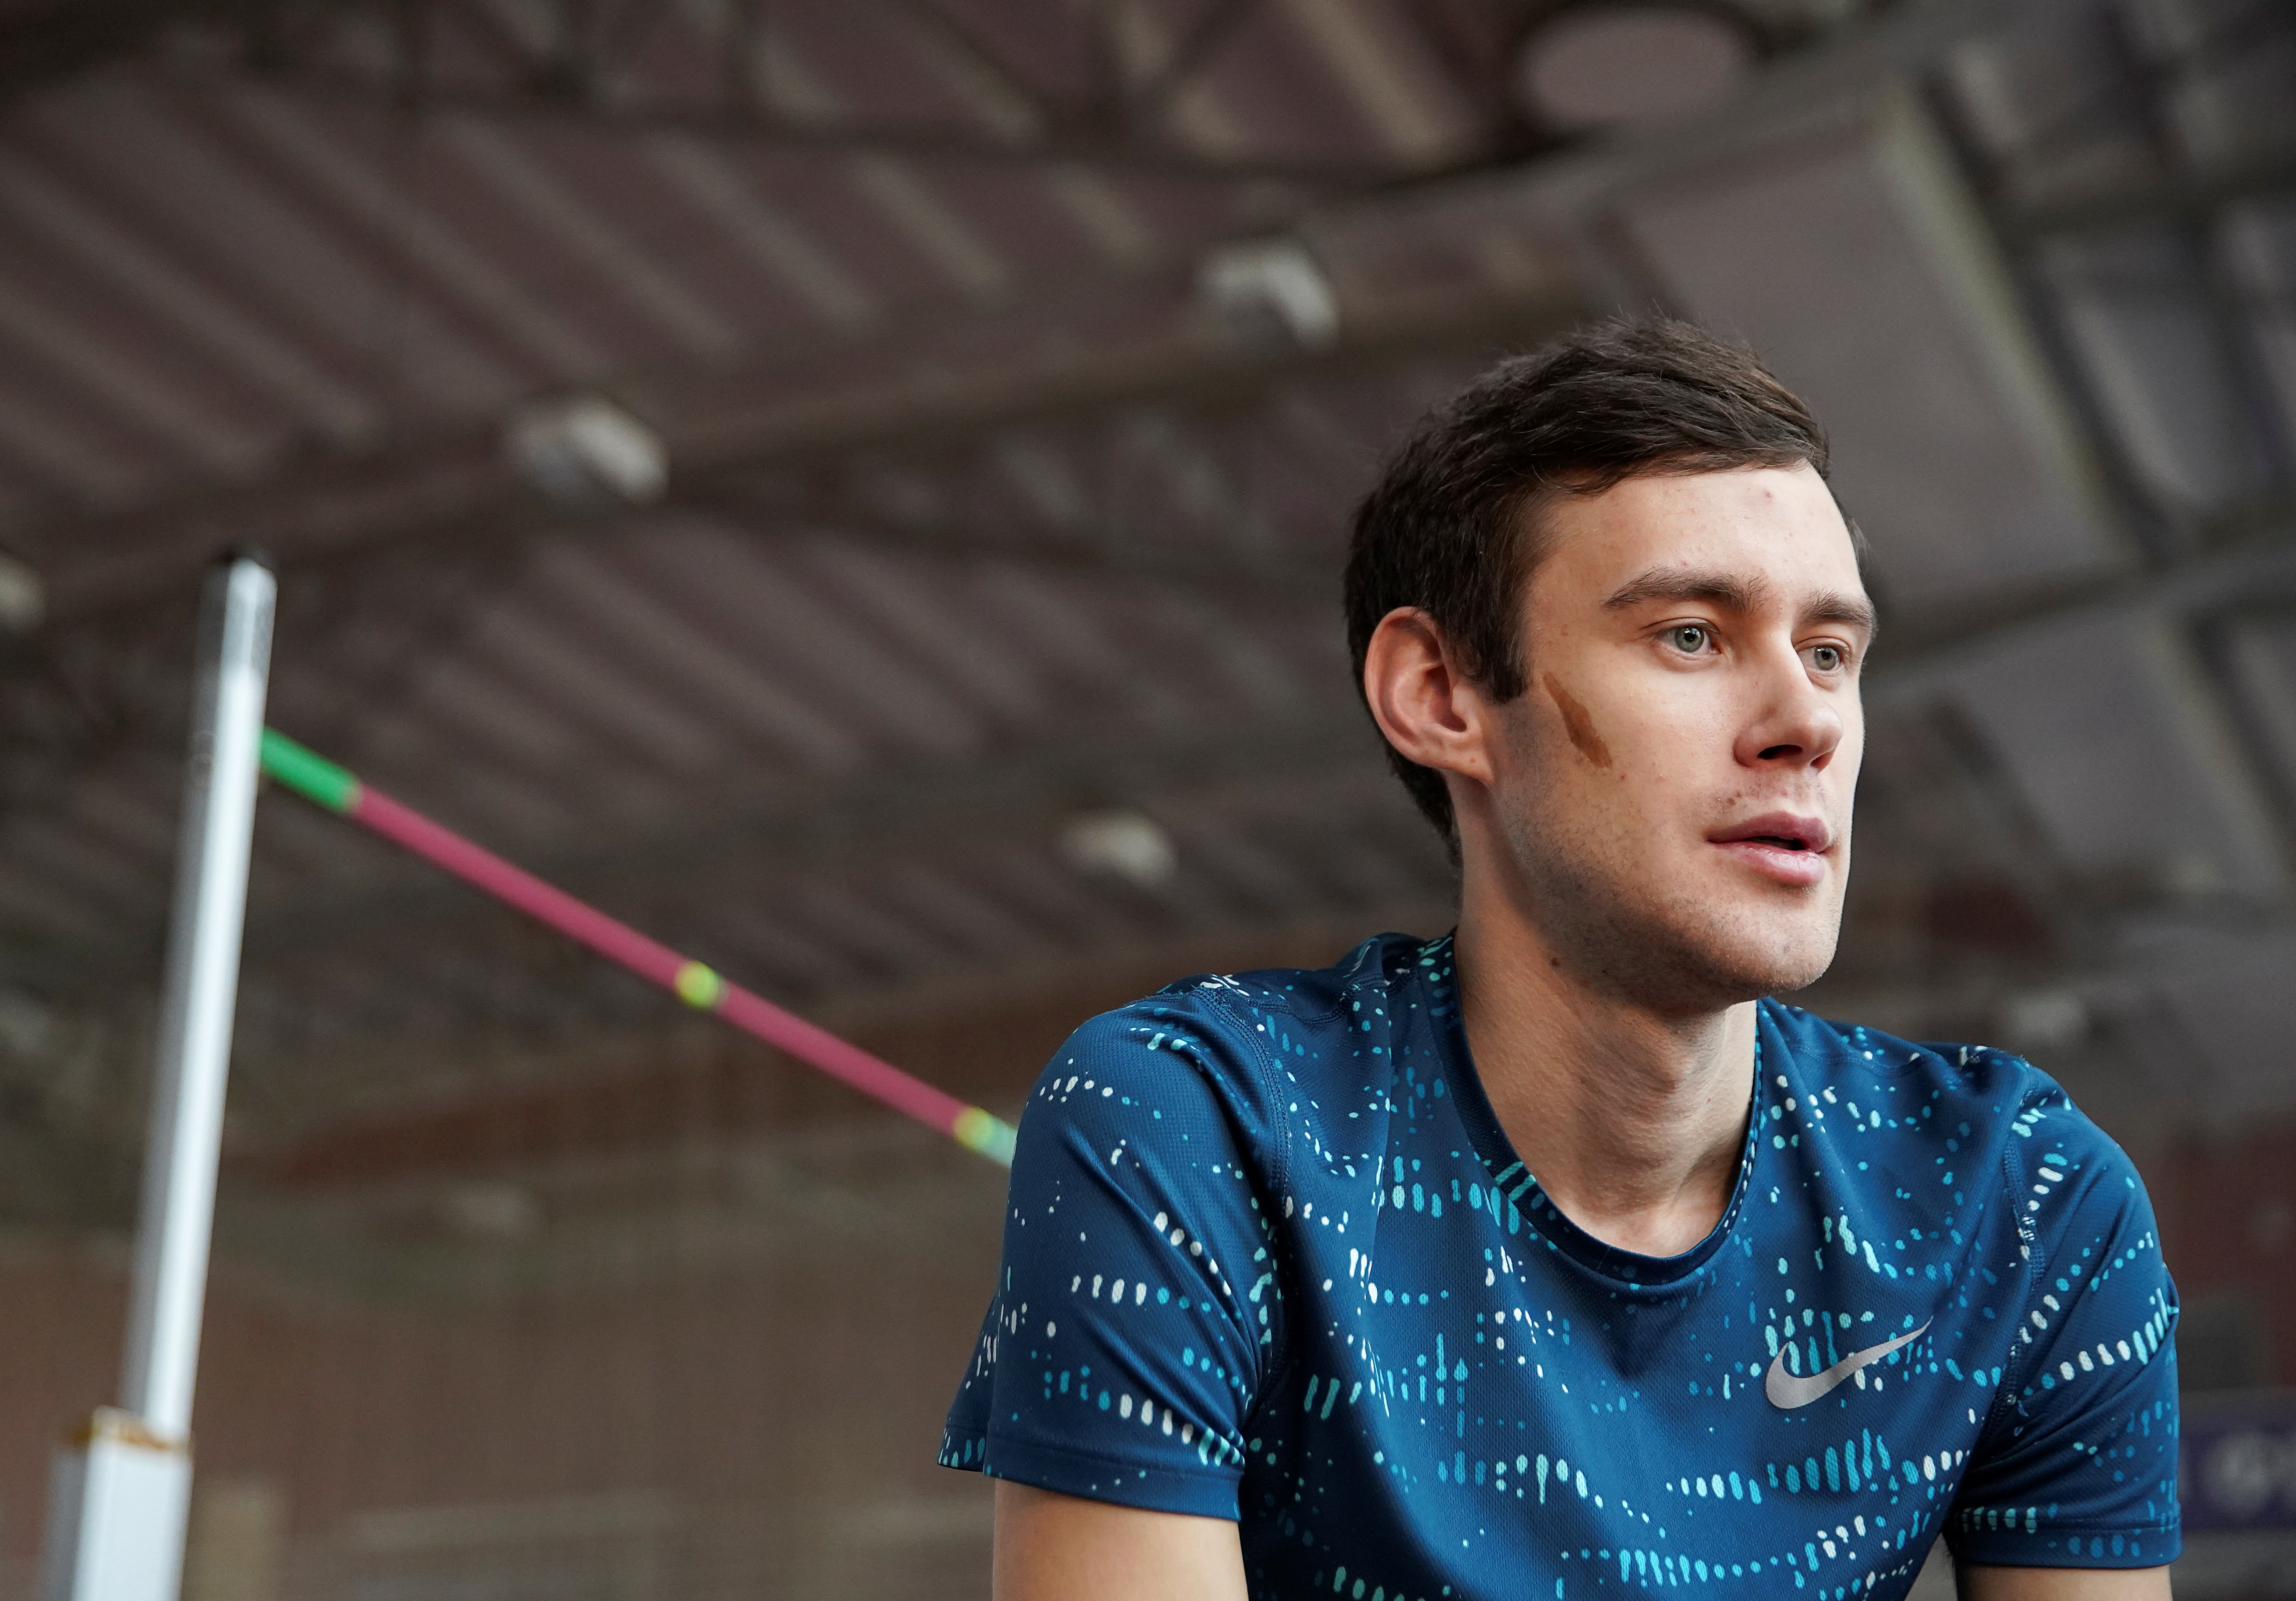 Russian high jumper Danil Lysenko gives an interview in Moscow